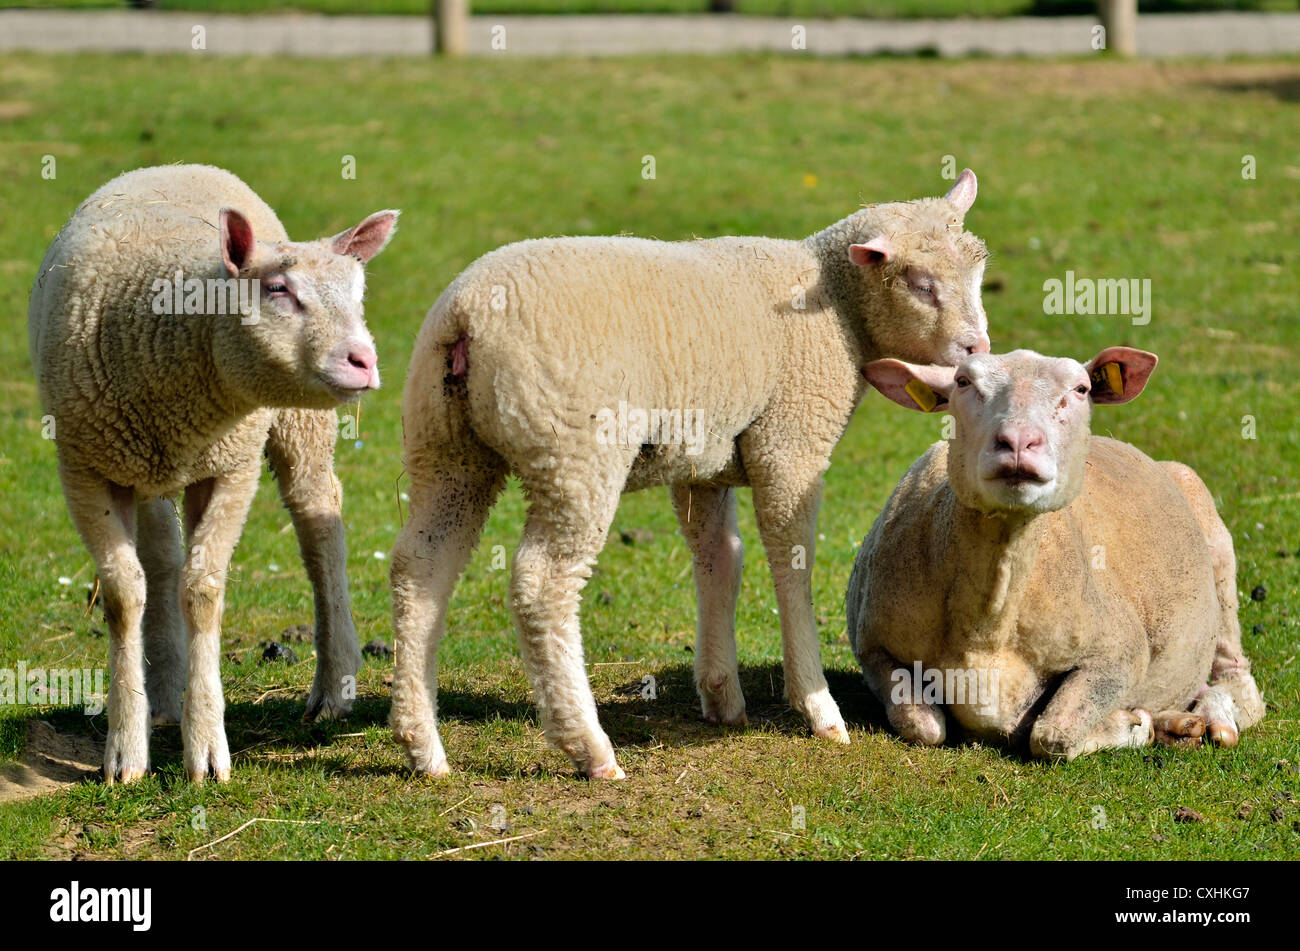 Sheep and two lambs (Ovis aries) on grass Stock Photo